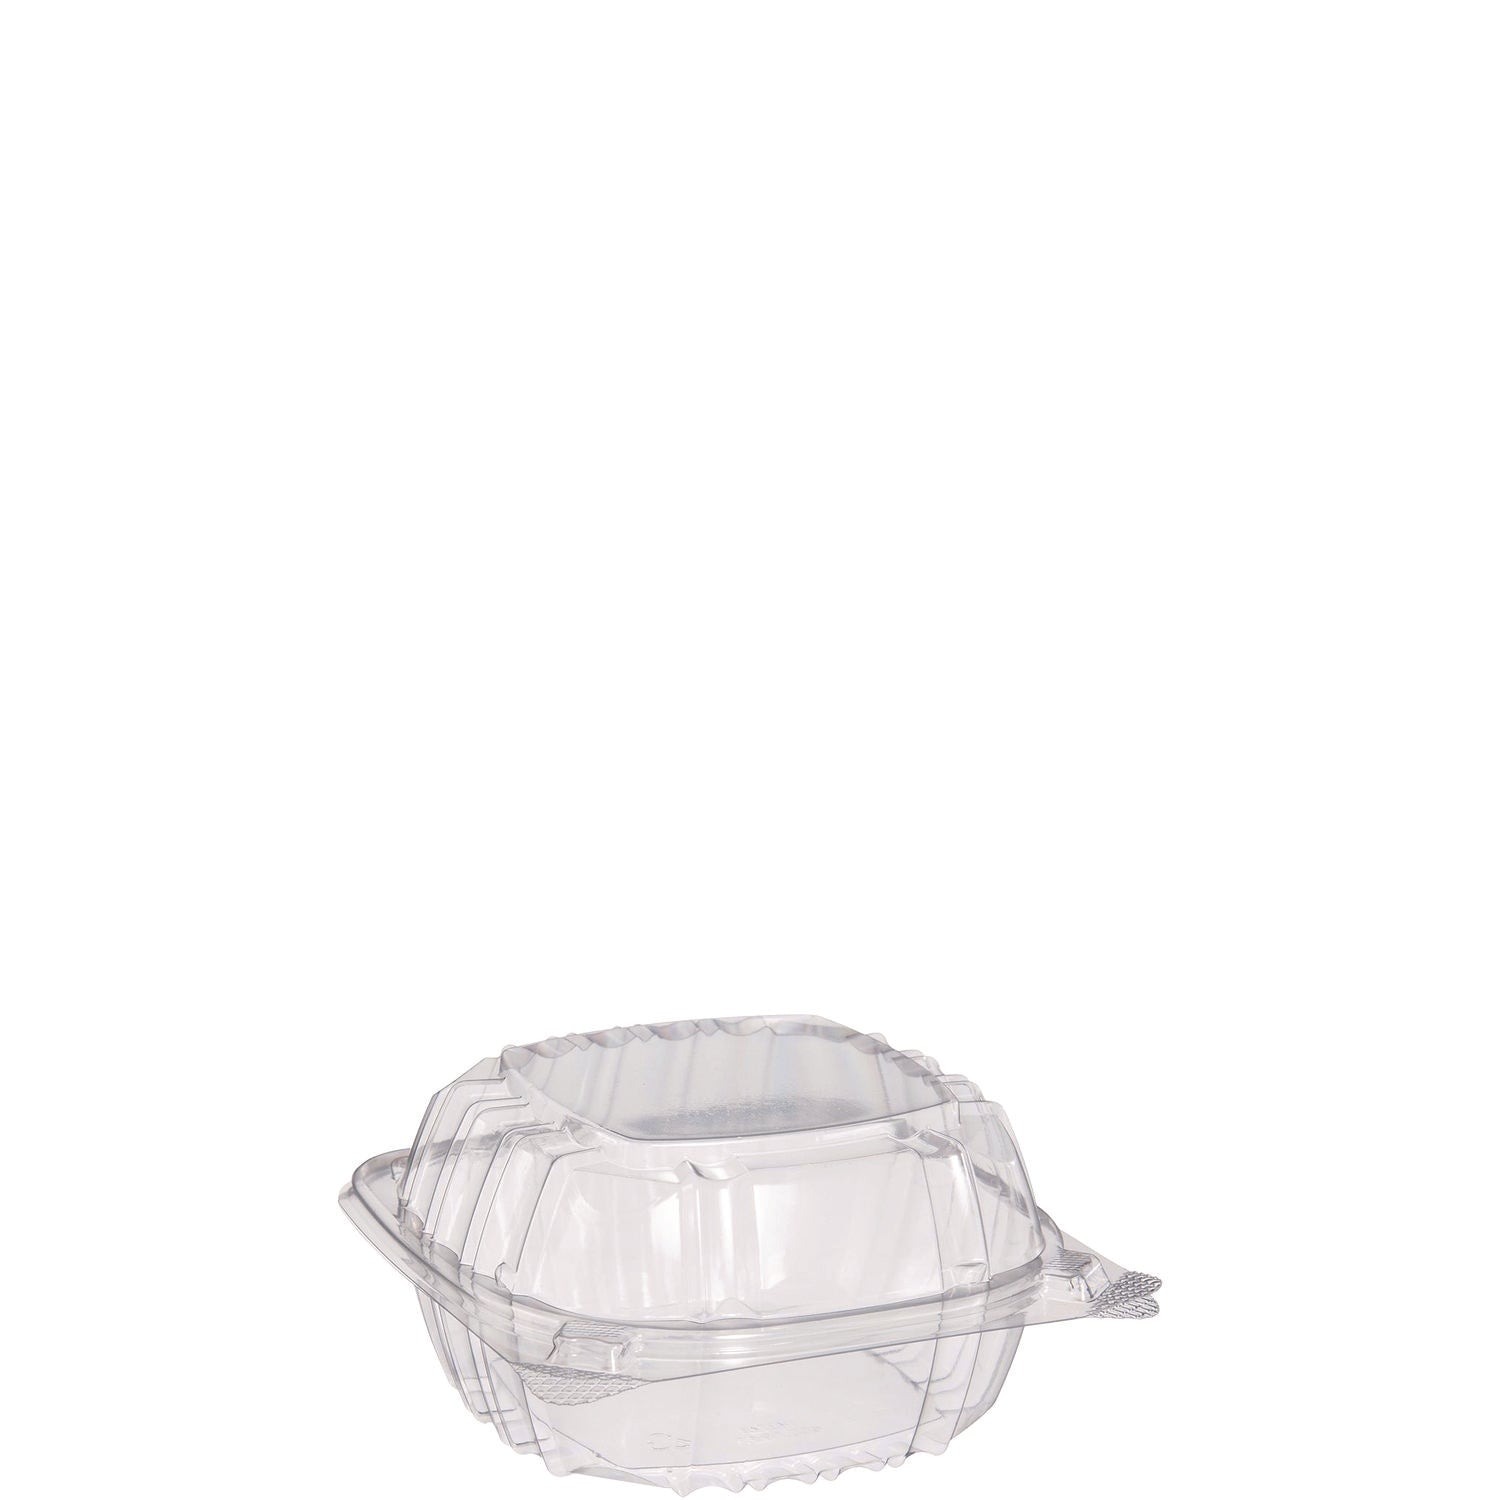 ClearSeal Hinged-Lid Plastic Containers, 5.8 x 6 x 3, Clear, Plastic, 125/Pack, 4 Packs/Carton - 